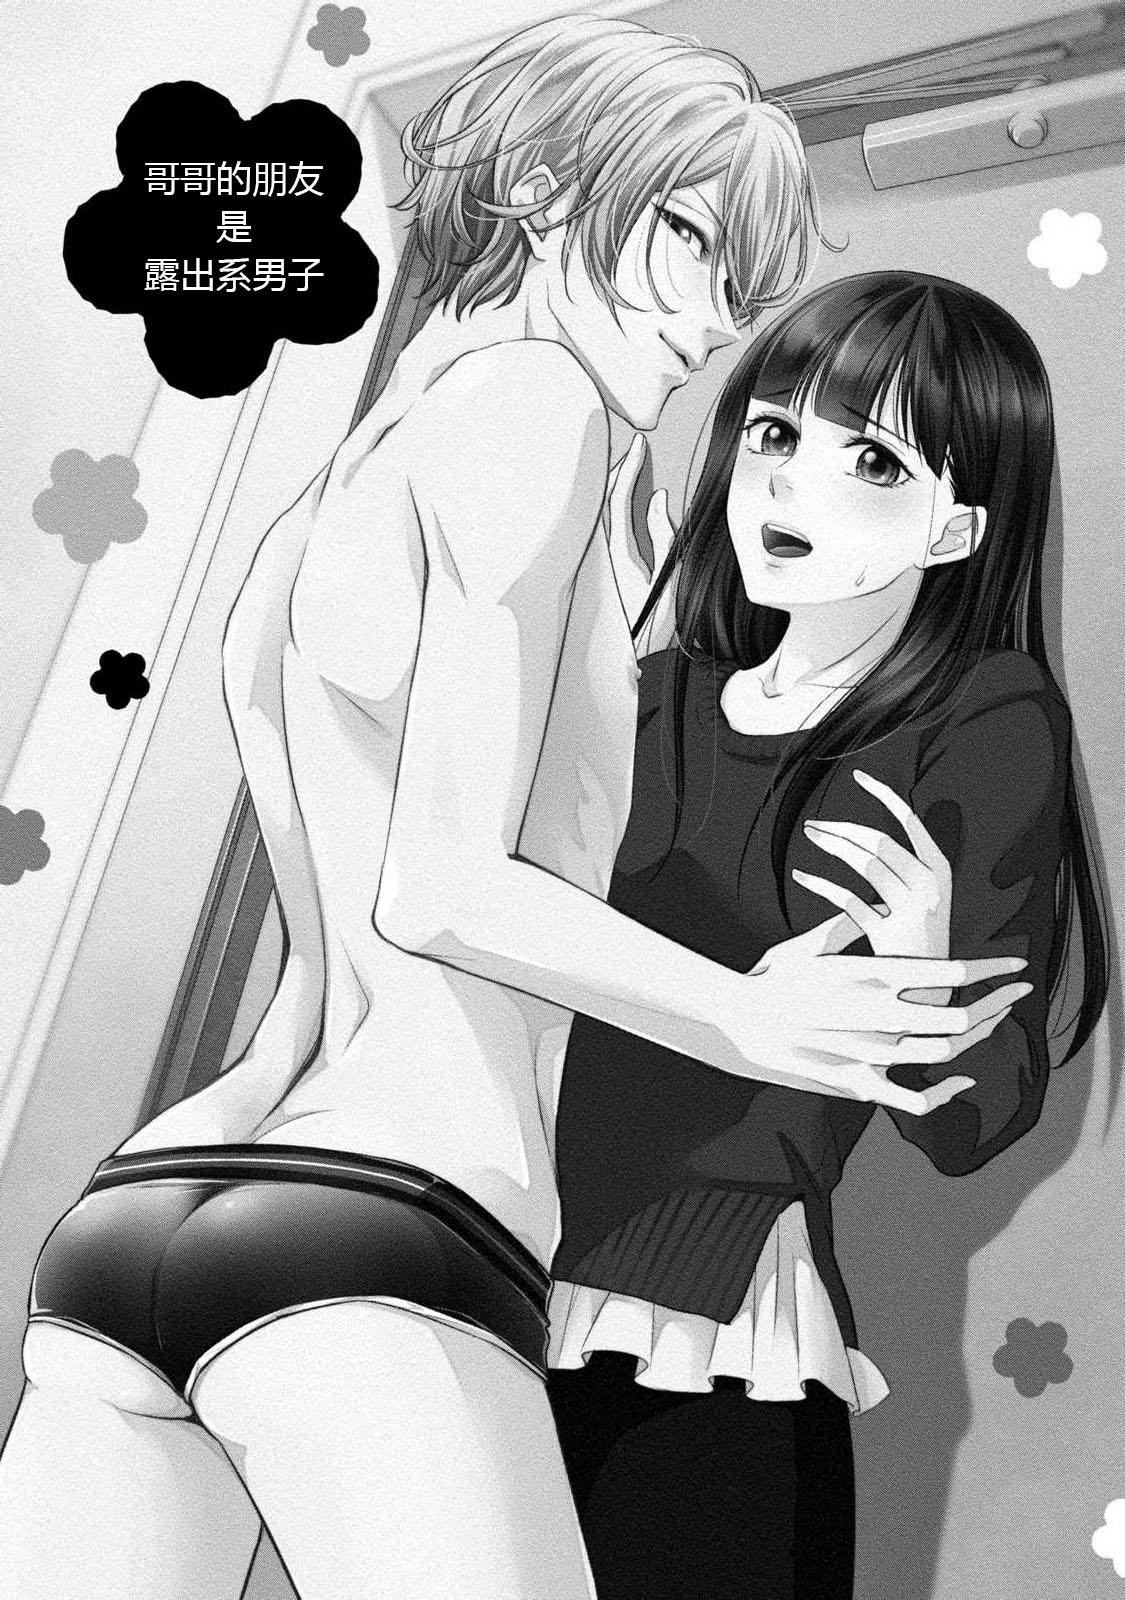 Storyline If my brother's friend was a male of exposure | 哥哥的朋友是露出系男子 Ano - Page 2